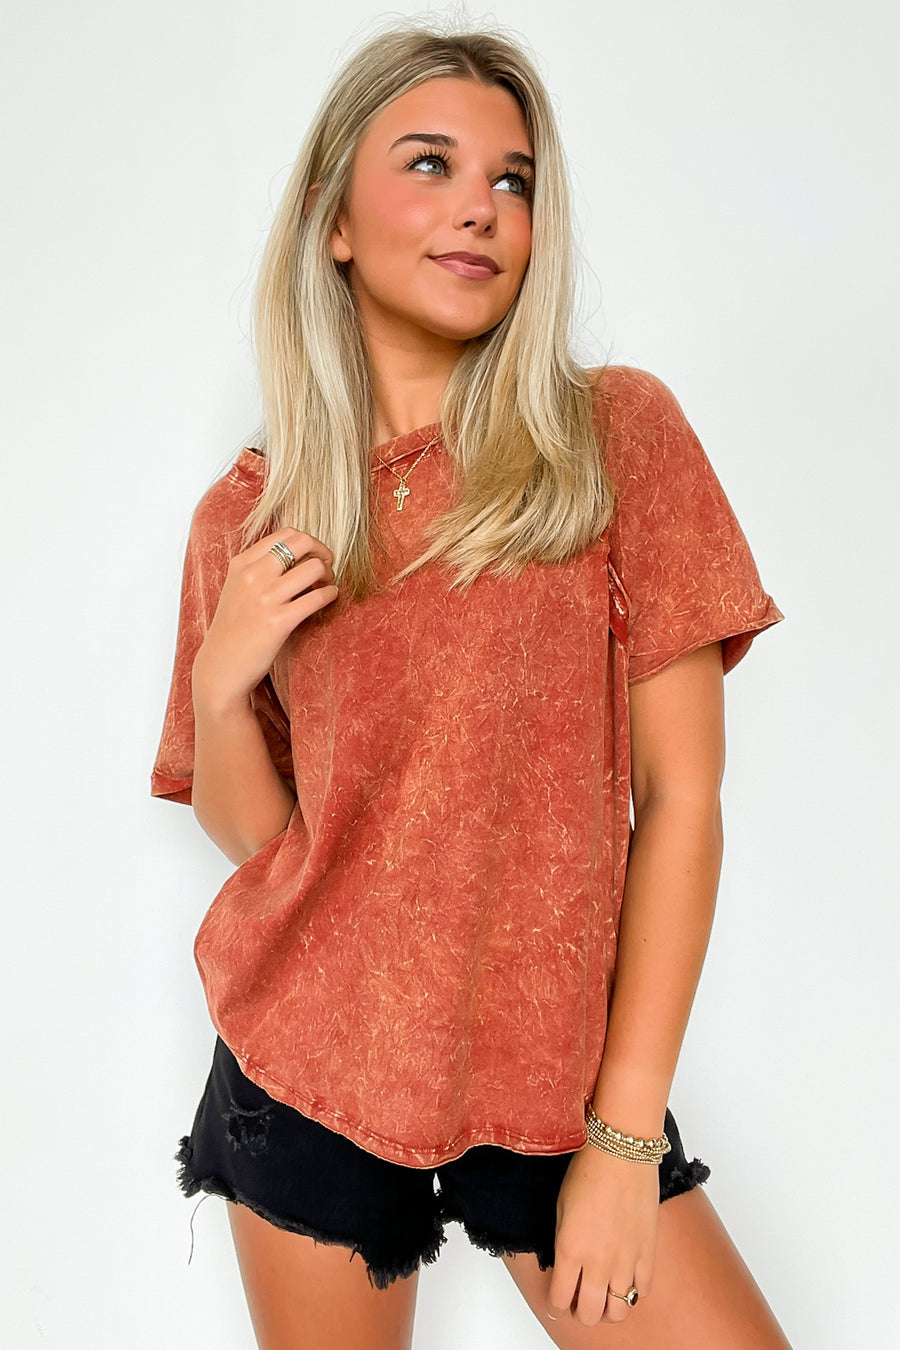 Carowyn Mineral Wash Relaxed Fit Top